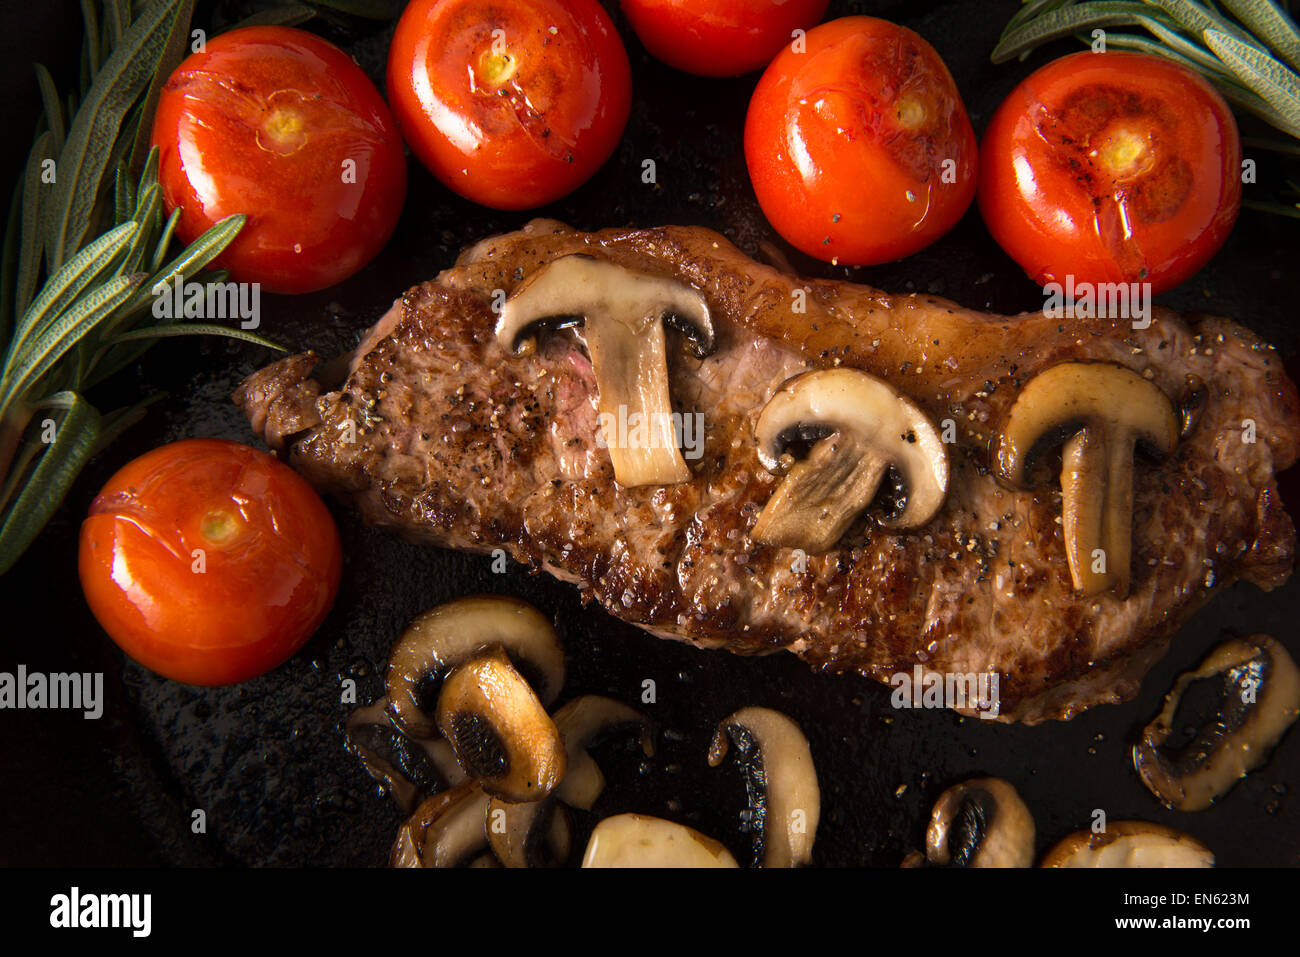 Grilling Strip Loin Steak in Cast Iron Frying Pan: Steak  is cooked  and sliced  - shown with grilled tomatoes and mushrooms Stock Photo